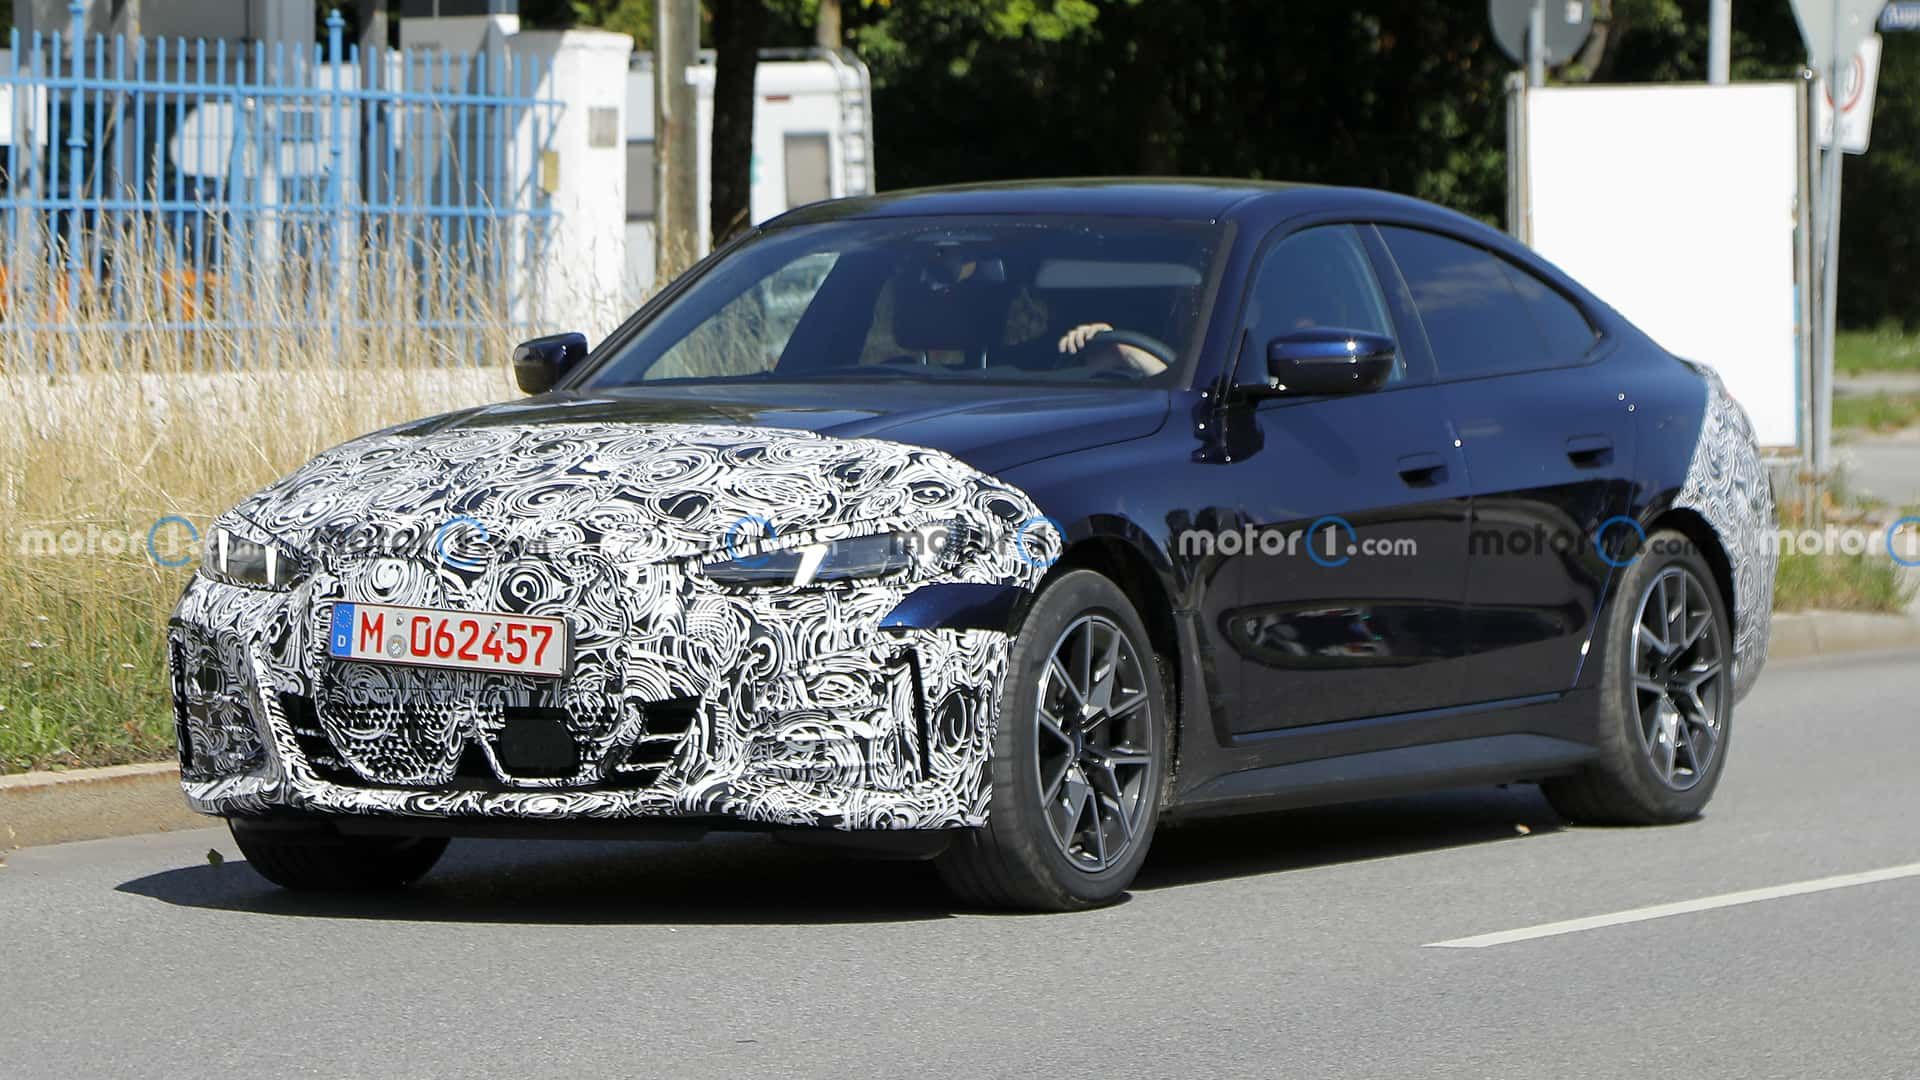 SPIED: BMW 4 Series Gran Coupe Seen Testing at the Nurburgring